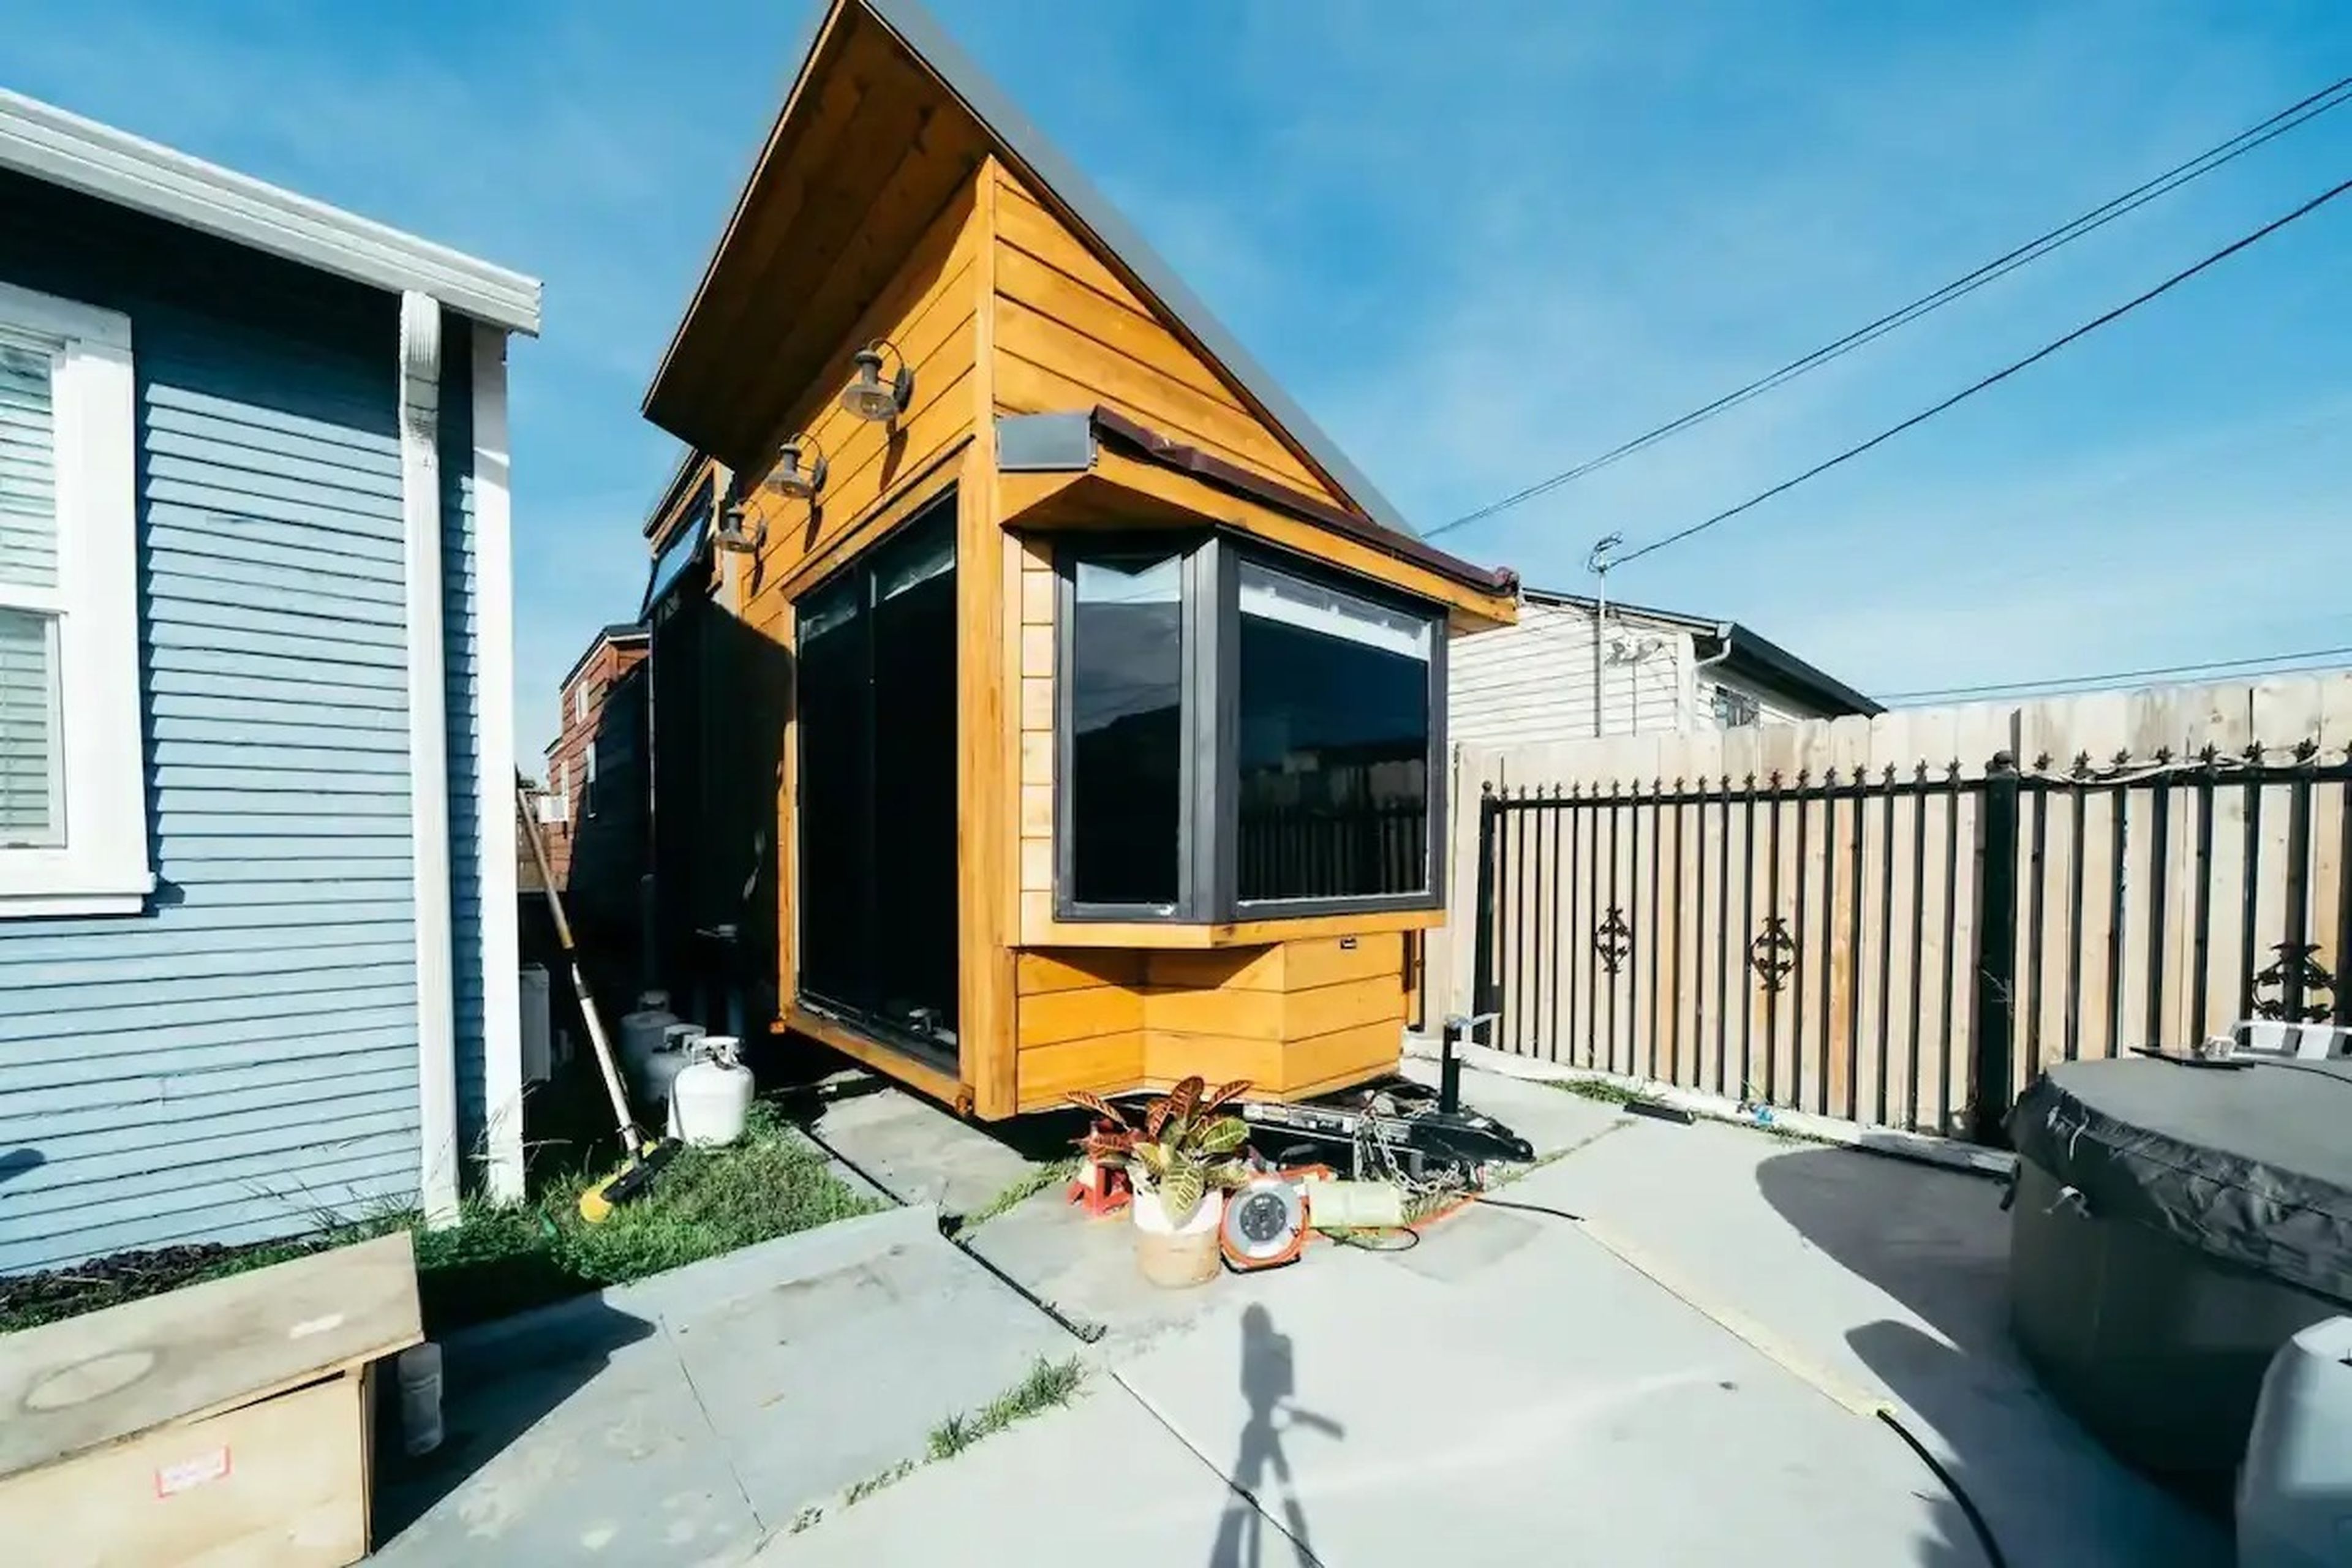 Ansel Troy's wooden tiny home on a patio outside of his home in Oakland, California.